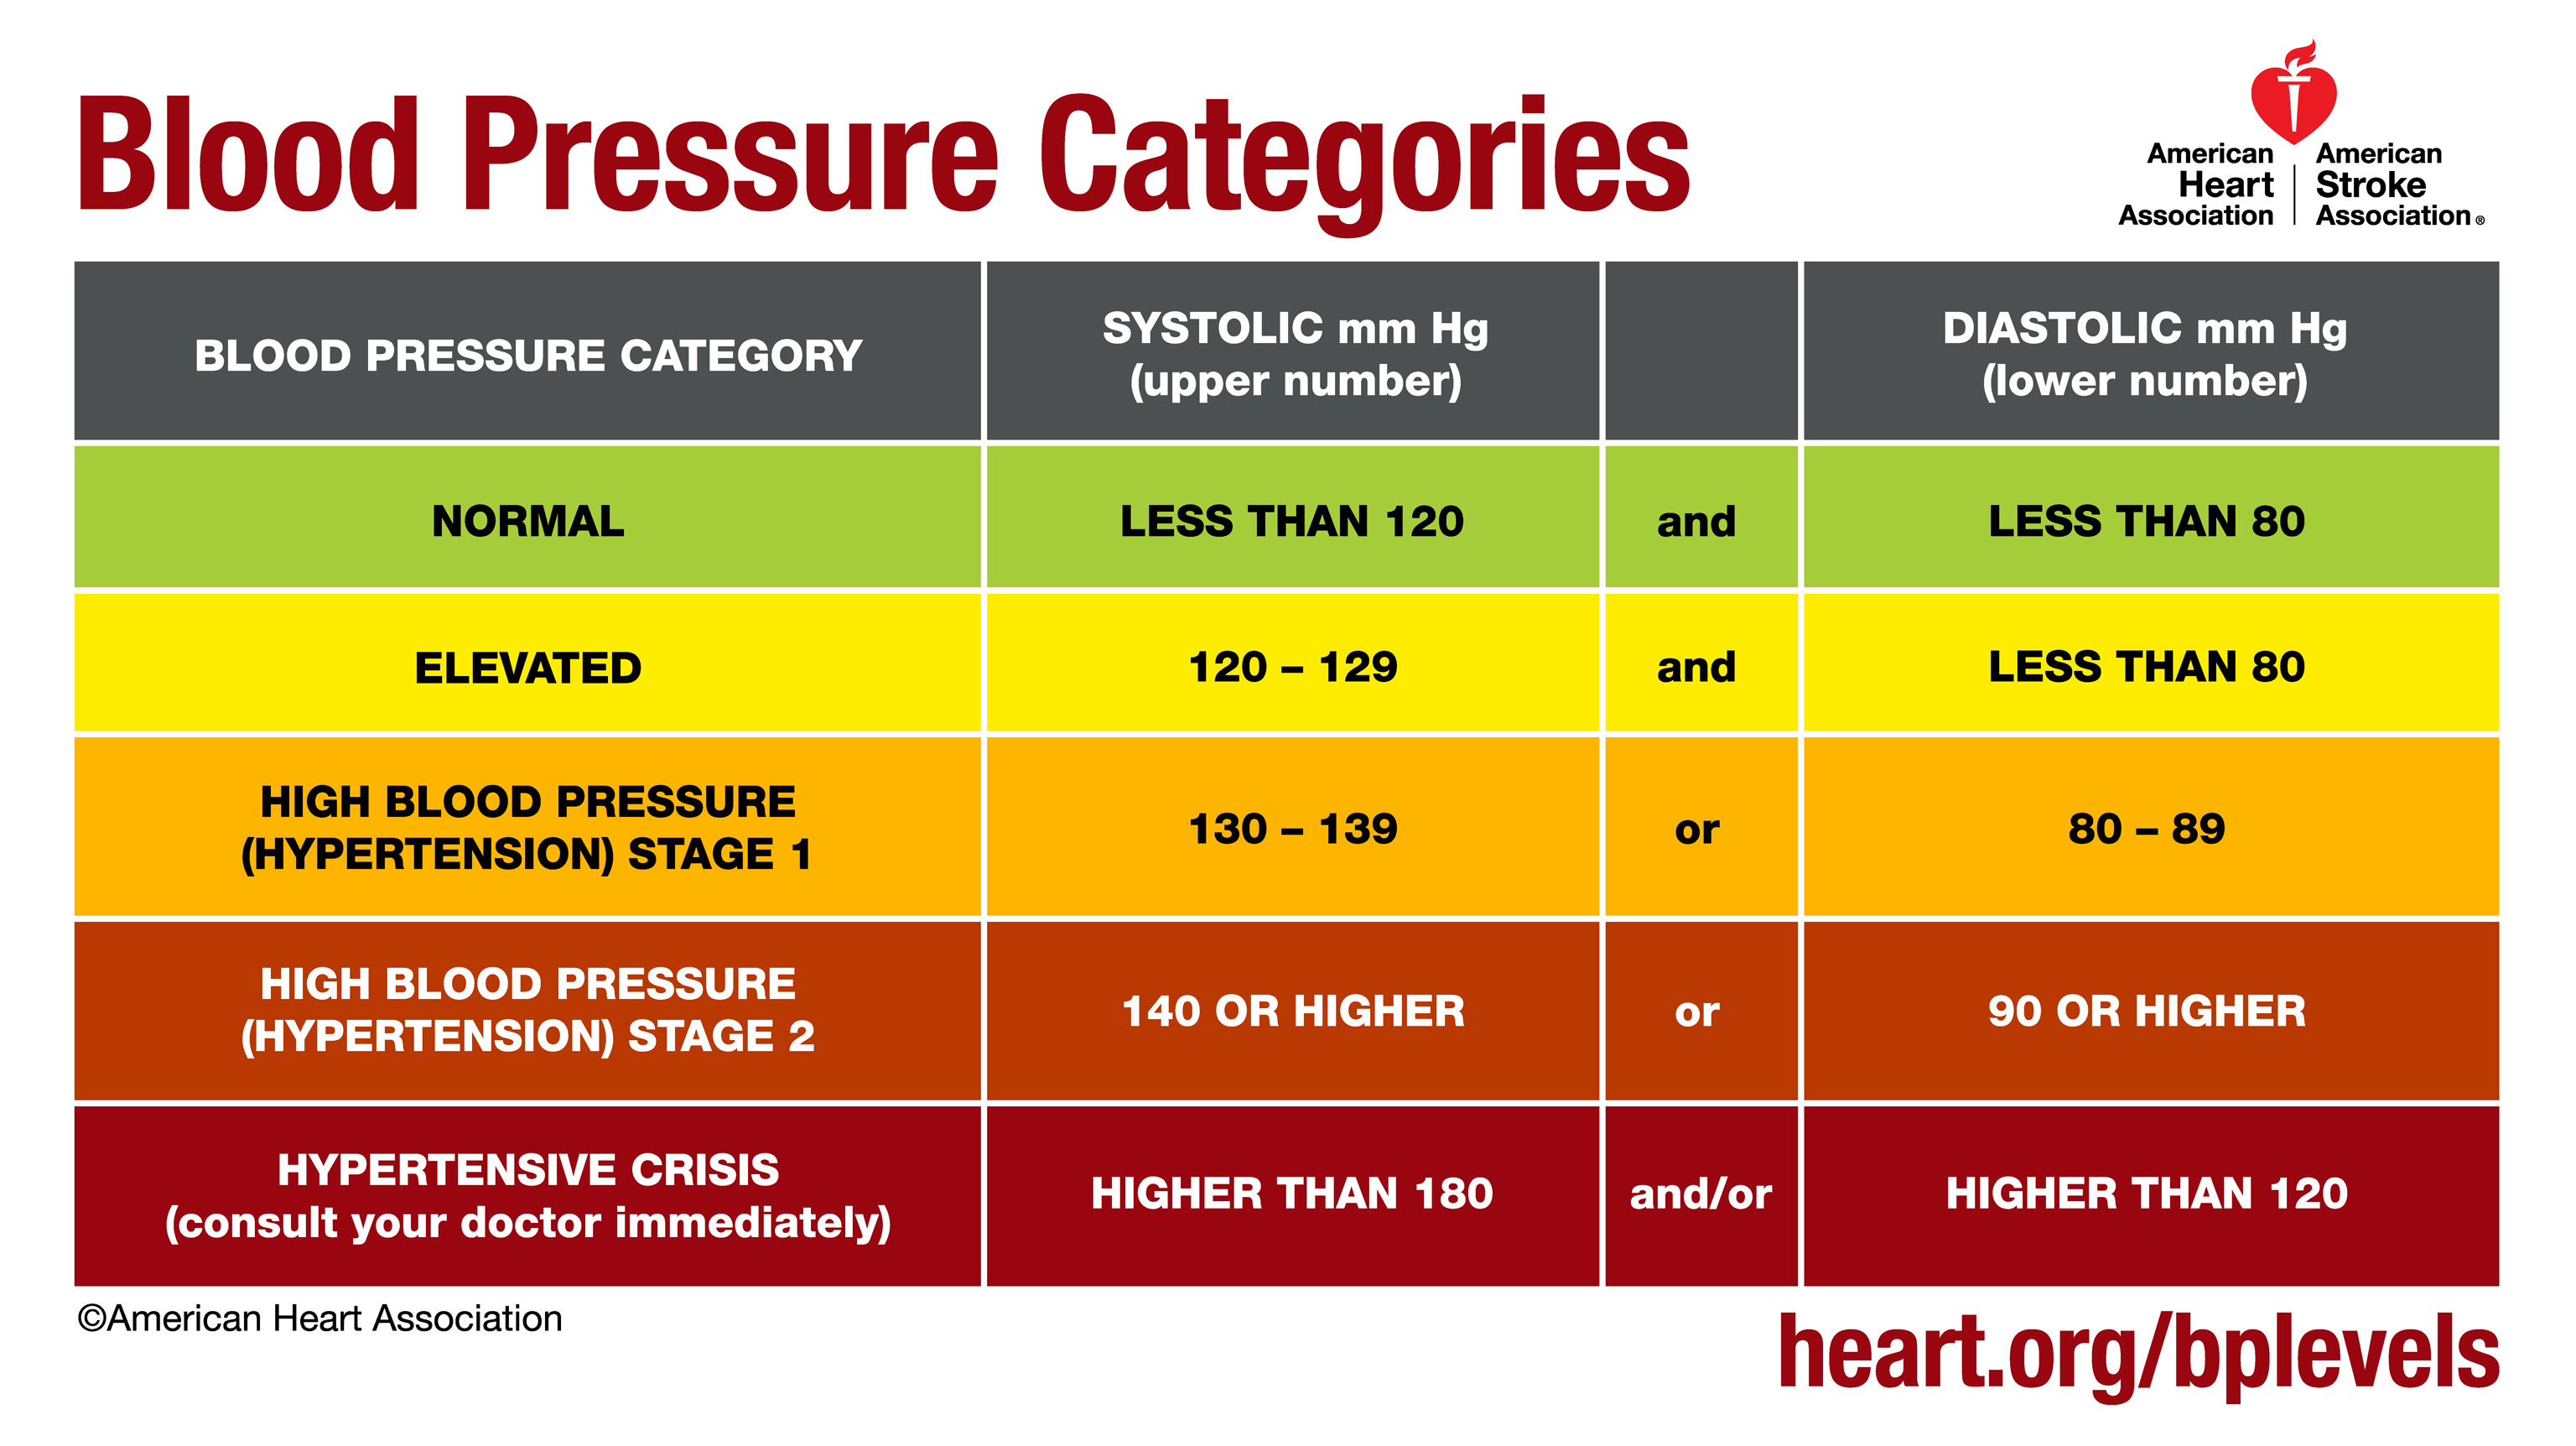 blood pressure is 120 over 90